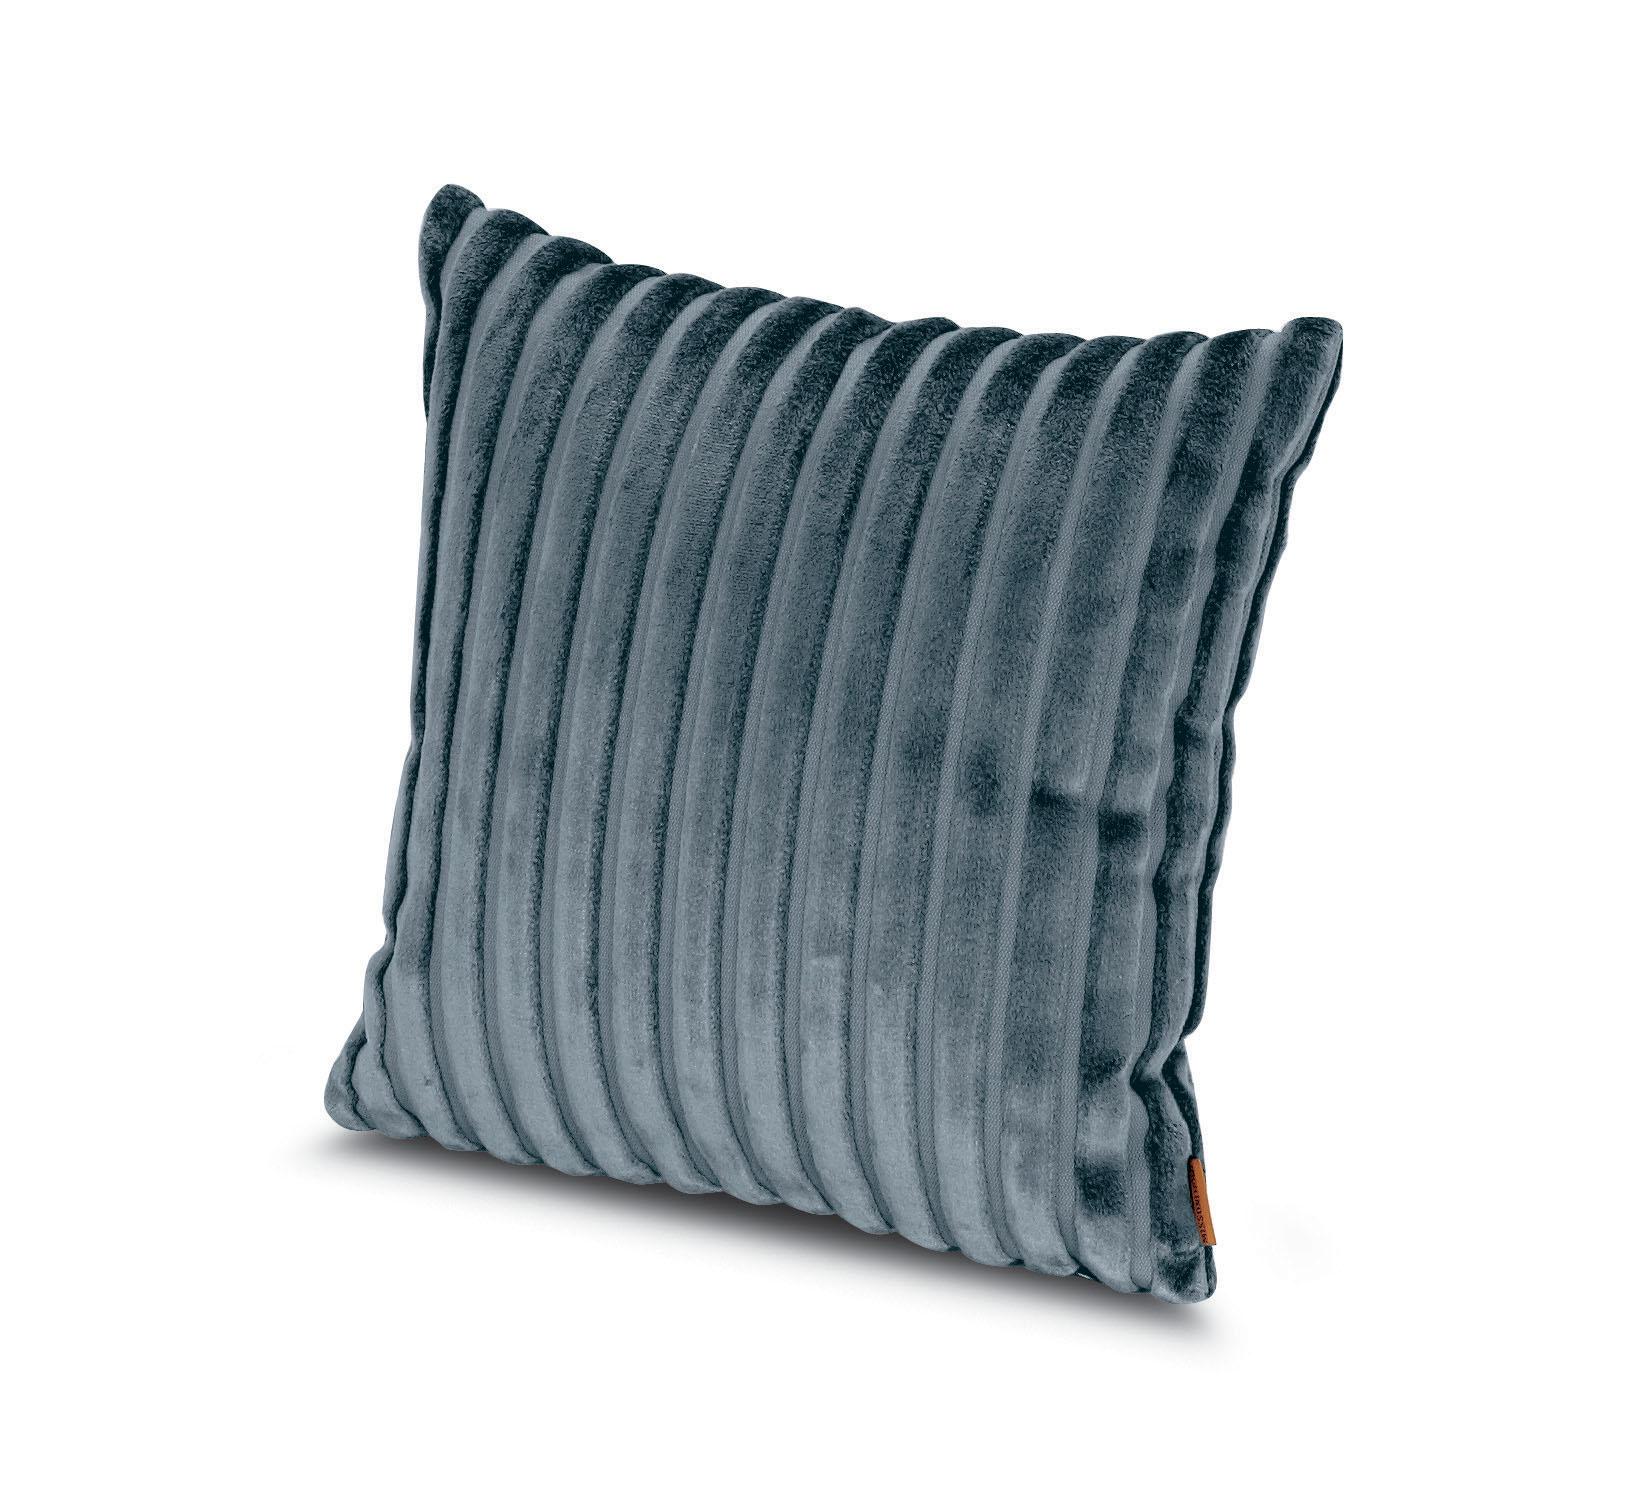 Missoni Home Coomba Cotton Cushion in Textured Blue Stripe Pattern For Sale